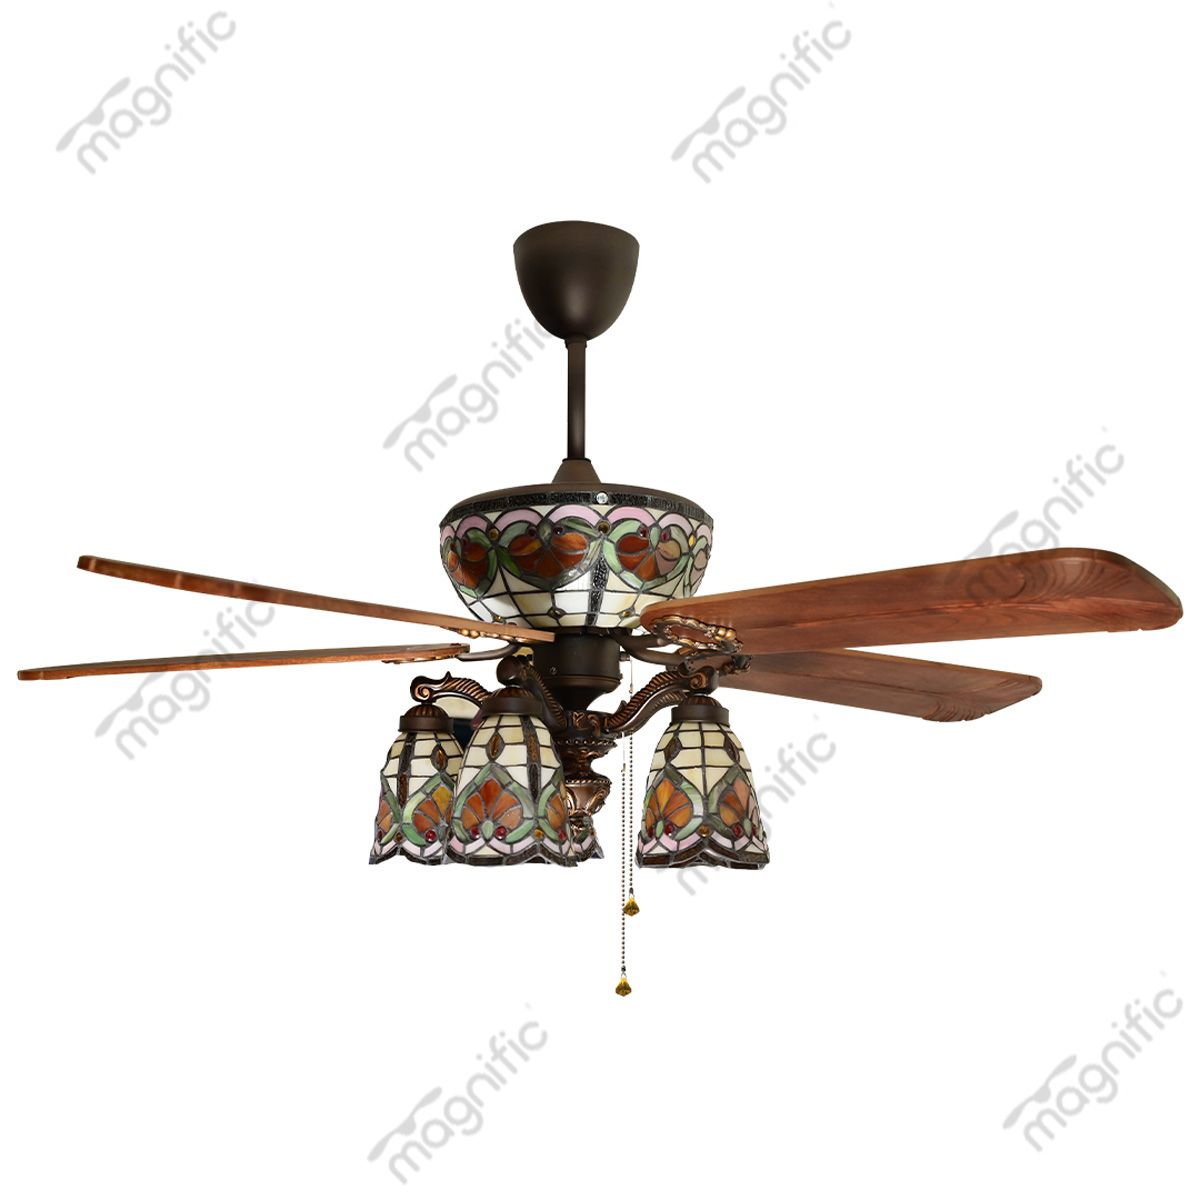 Buy antique ceiling fans in India from Magnific Home Appliances.